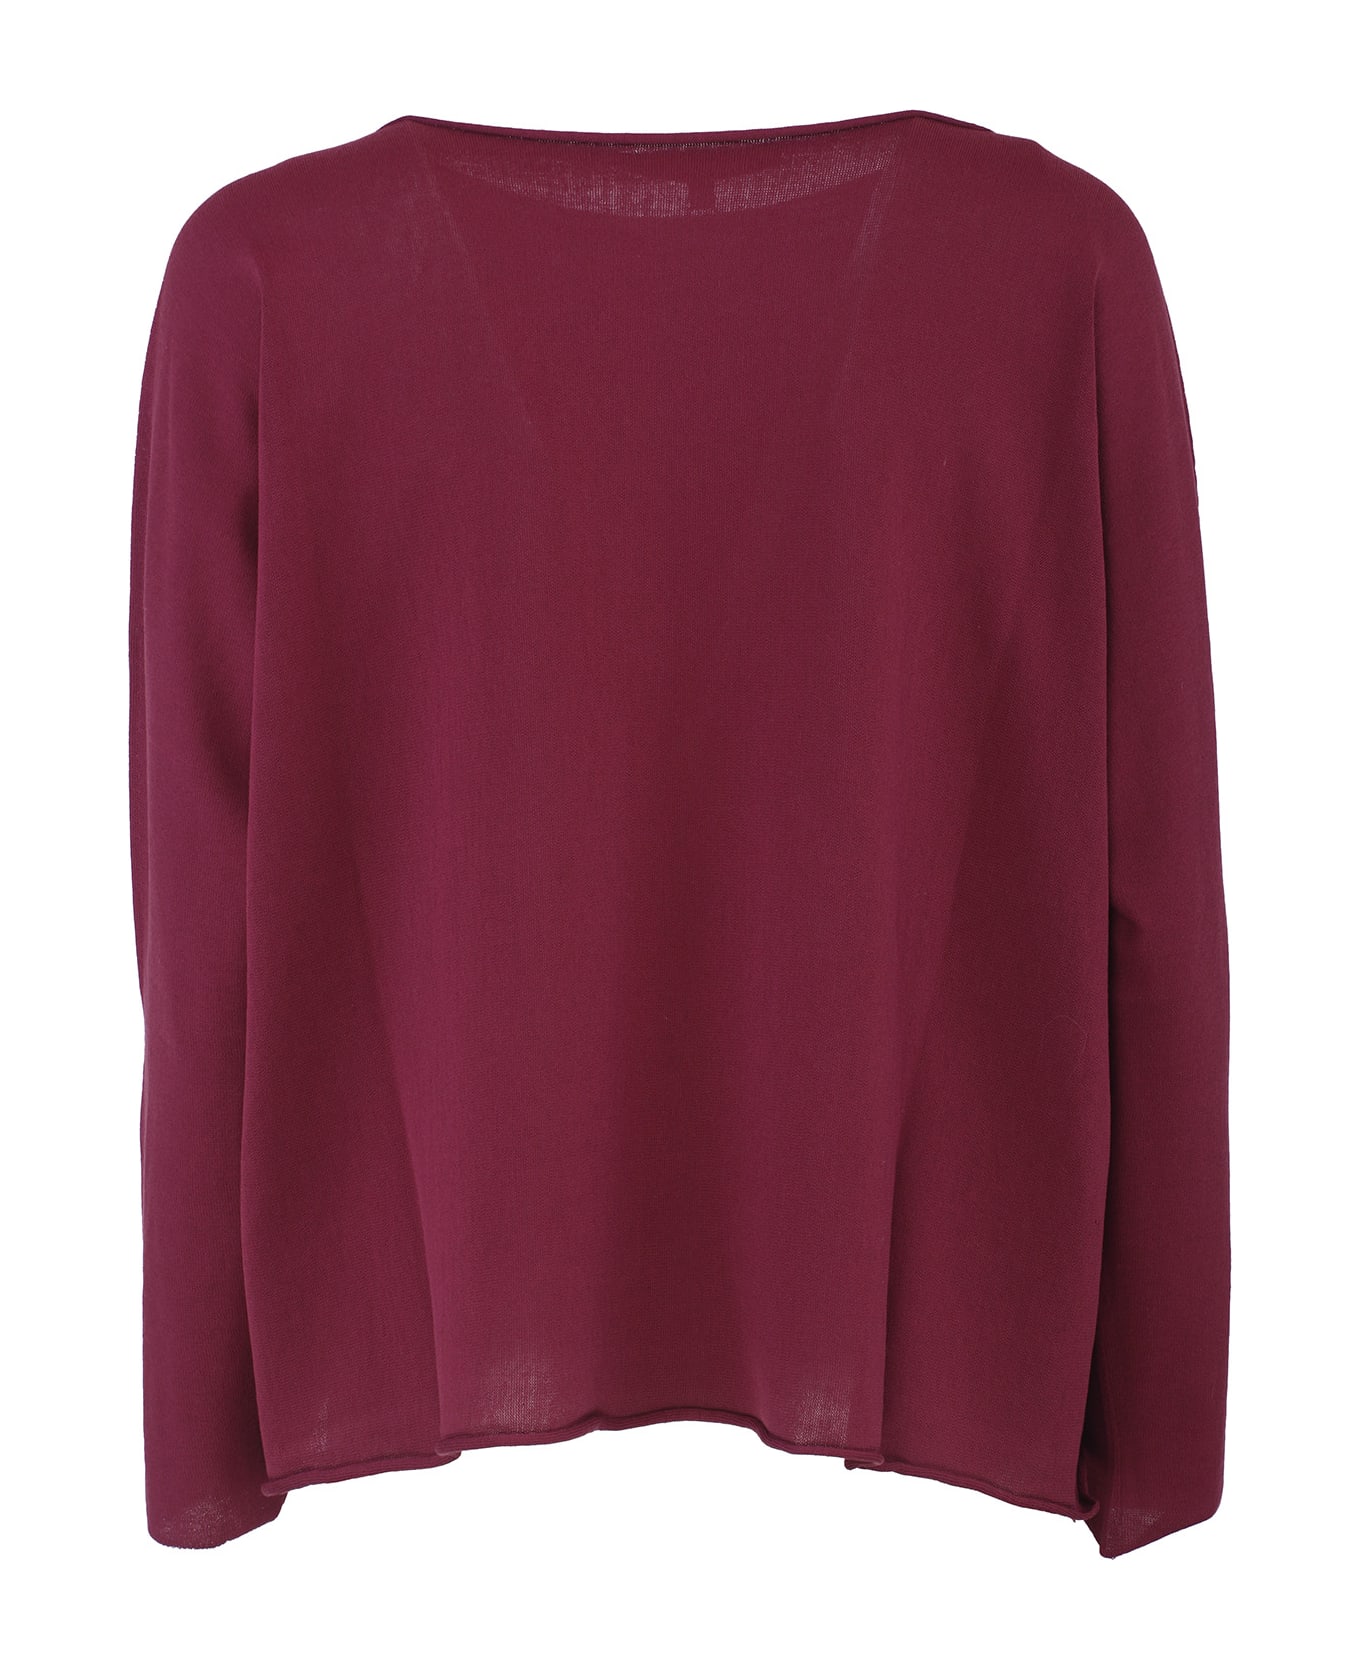 Antonelli Firenze Sweaters Red - Red